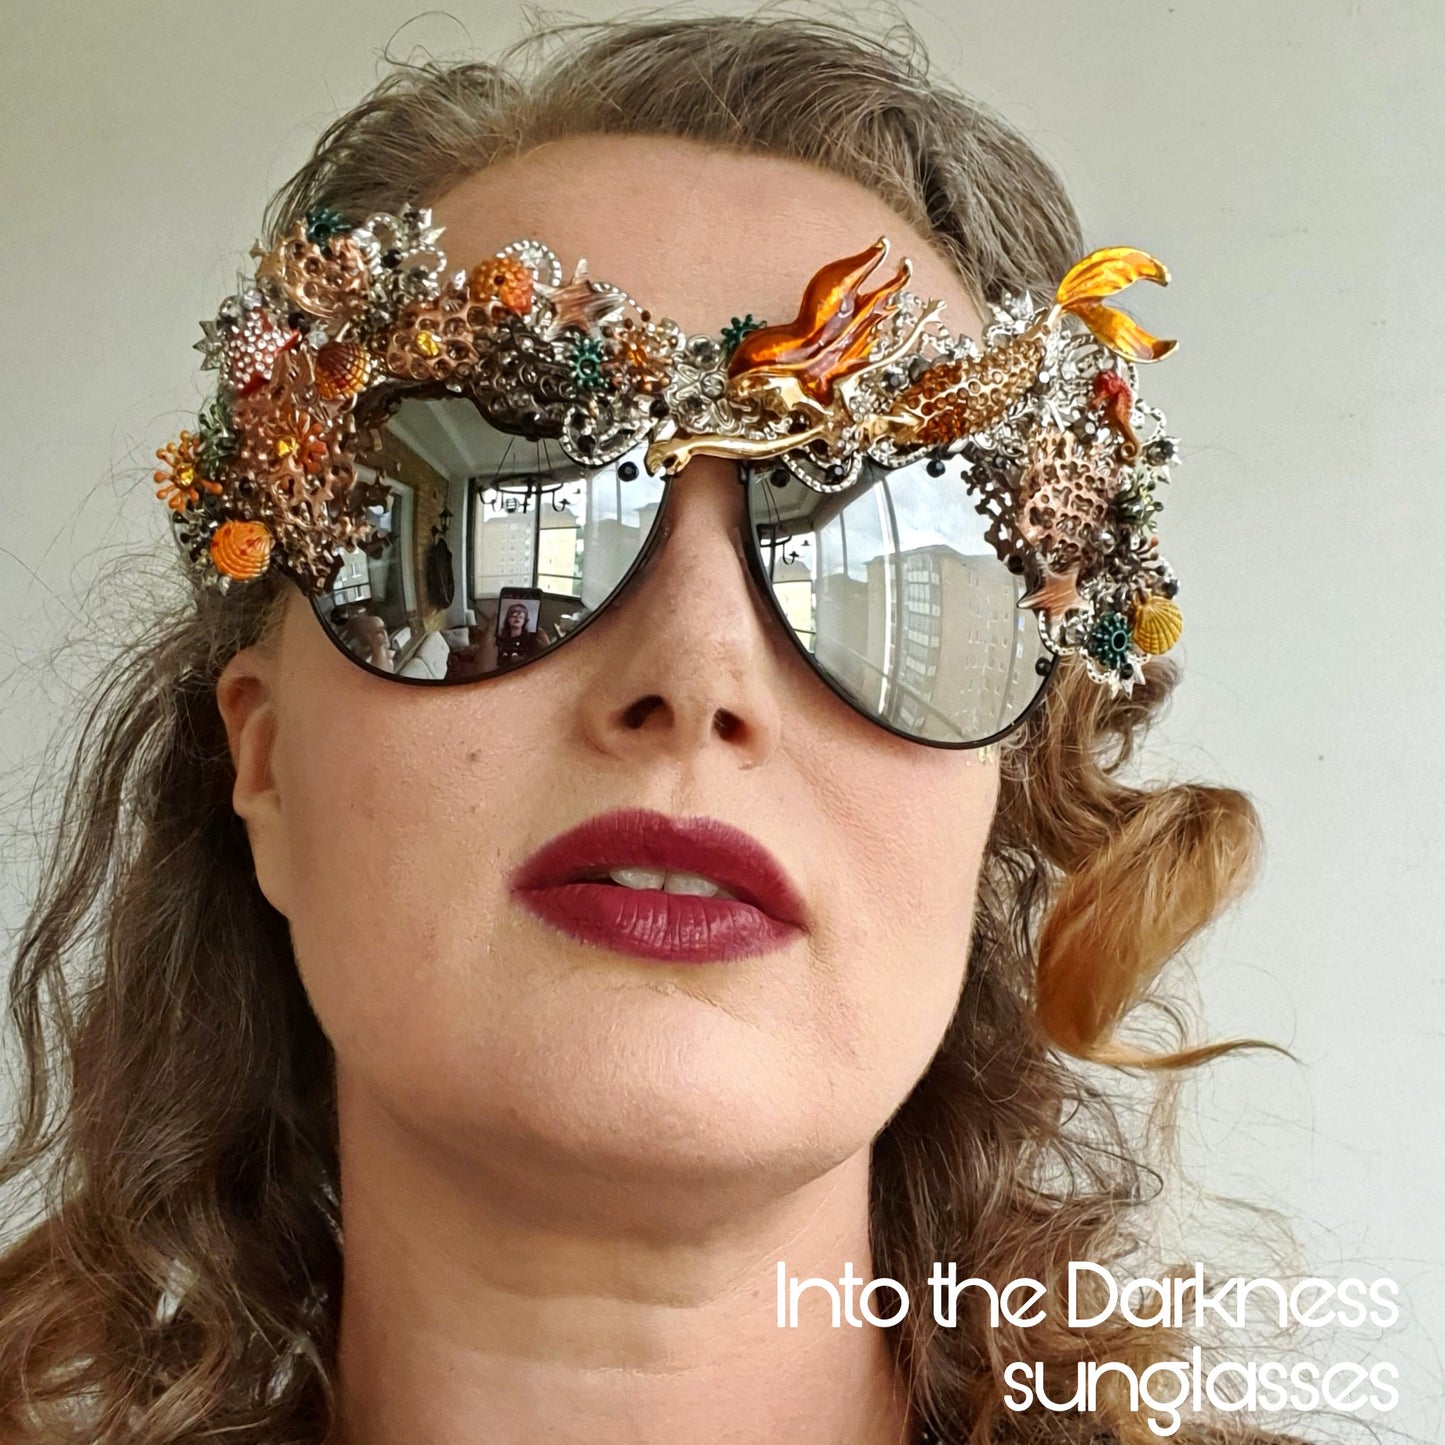 Shifting Depths collection: the Into the Darkness showpiece sunglasses